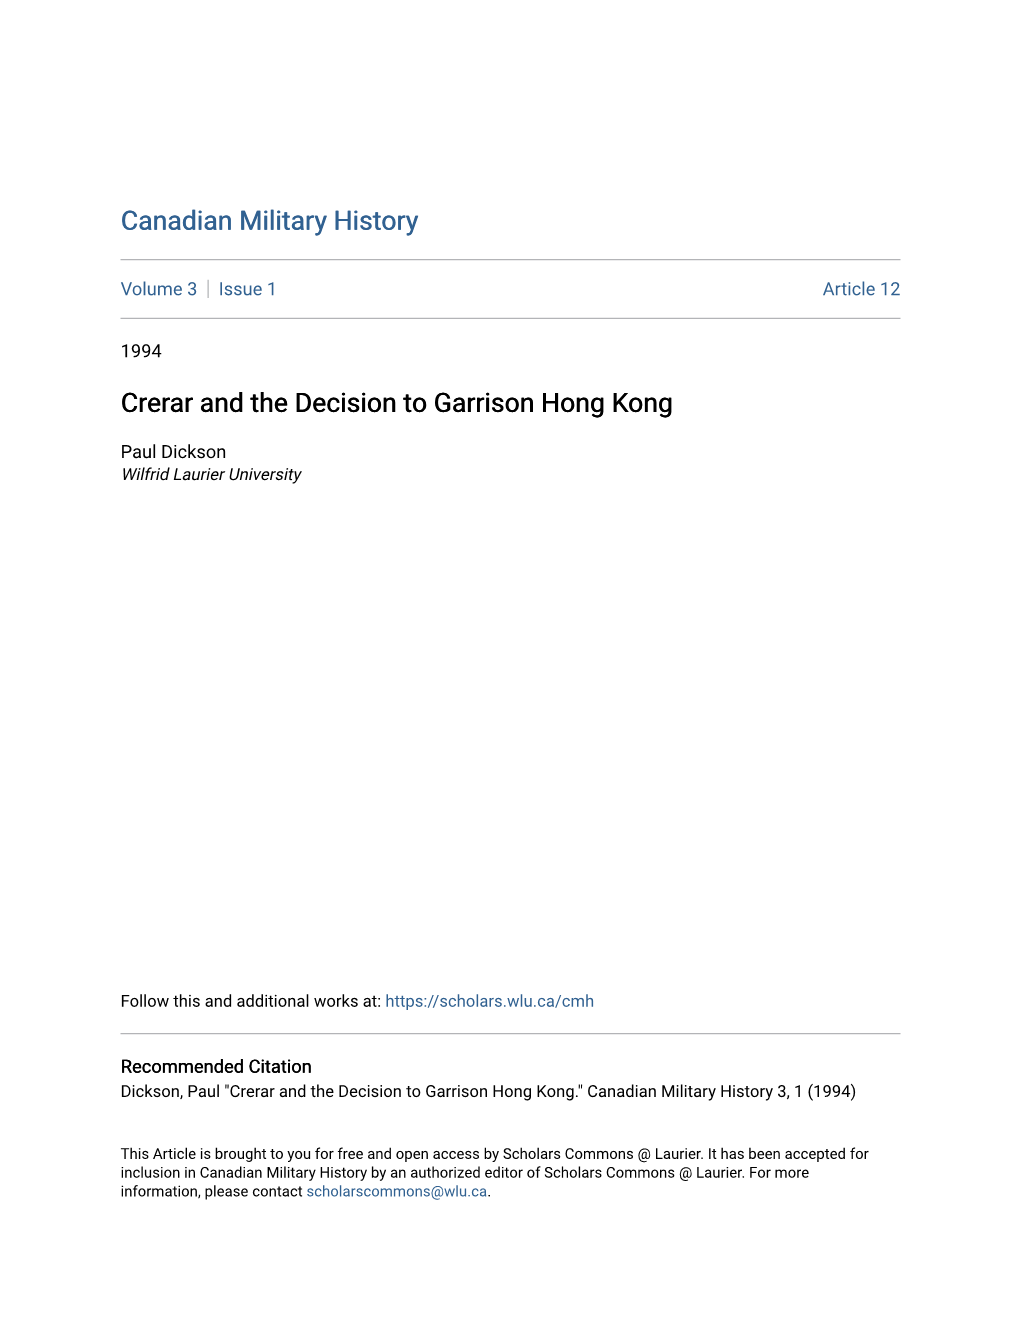 Crerar and the Decision to Garrison Hong Kong